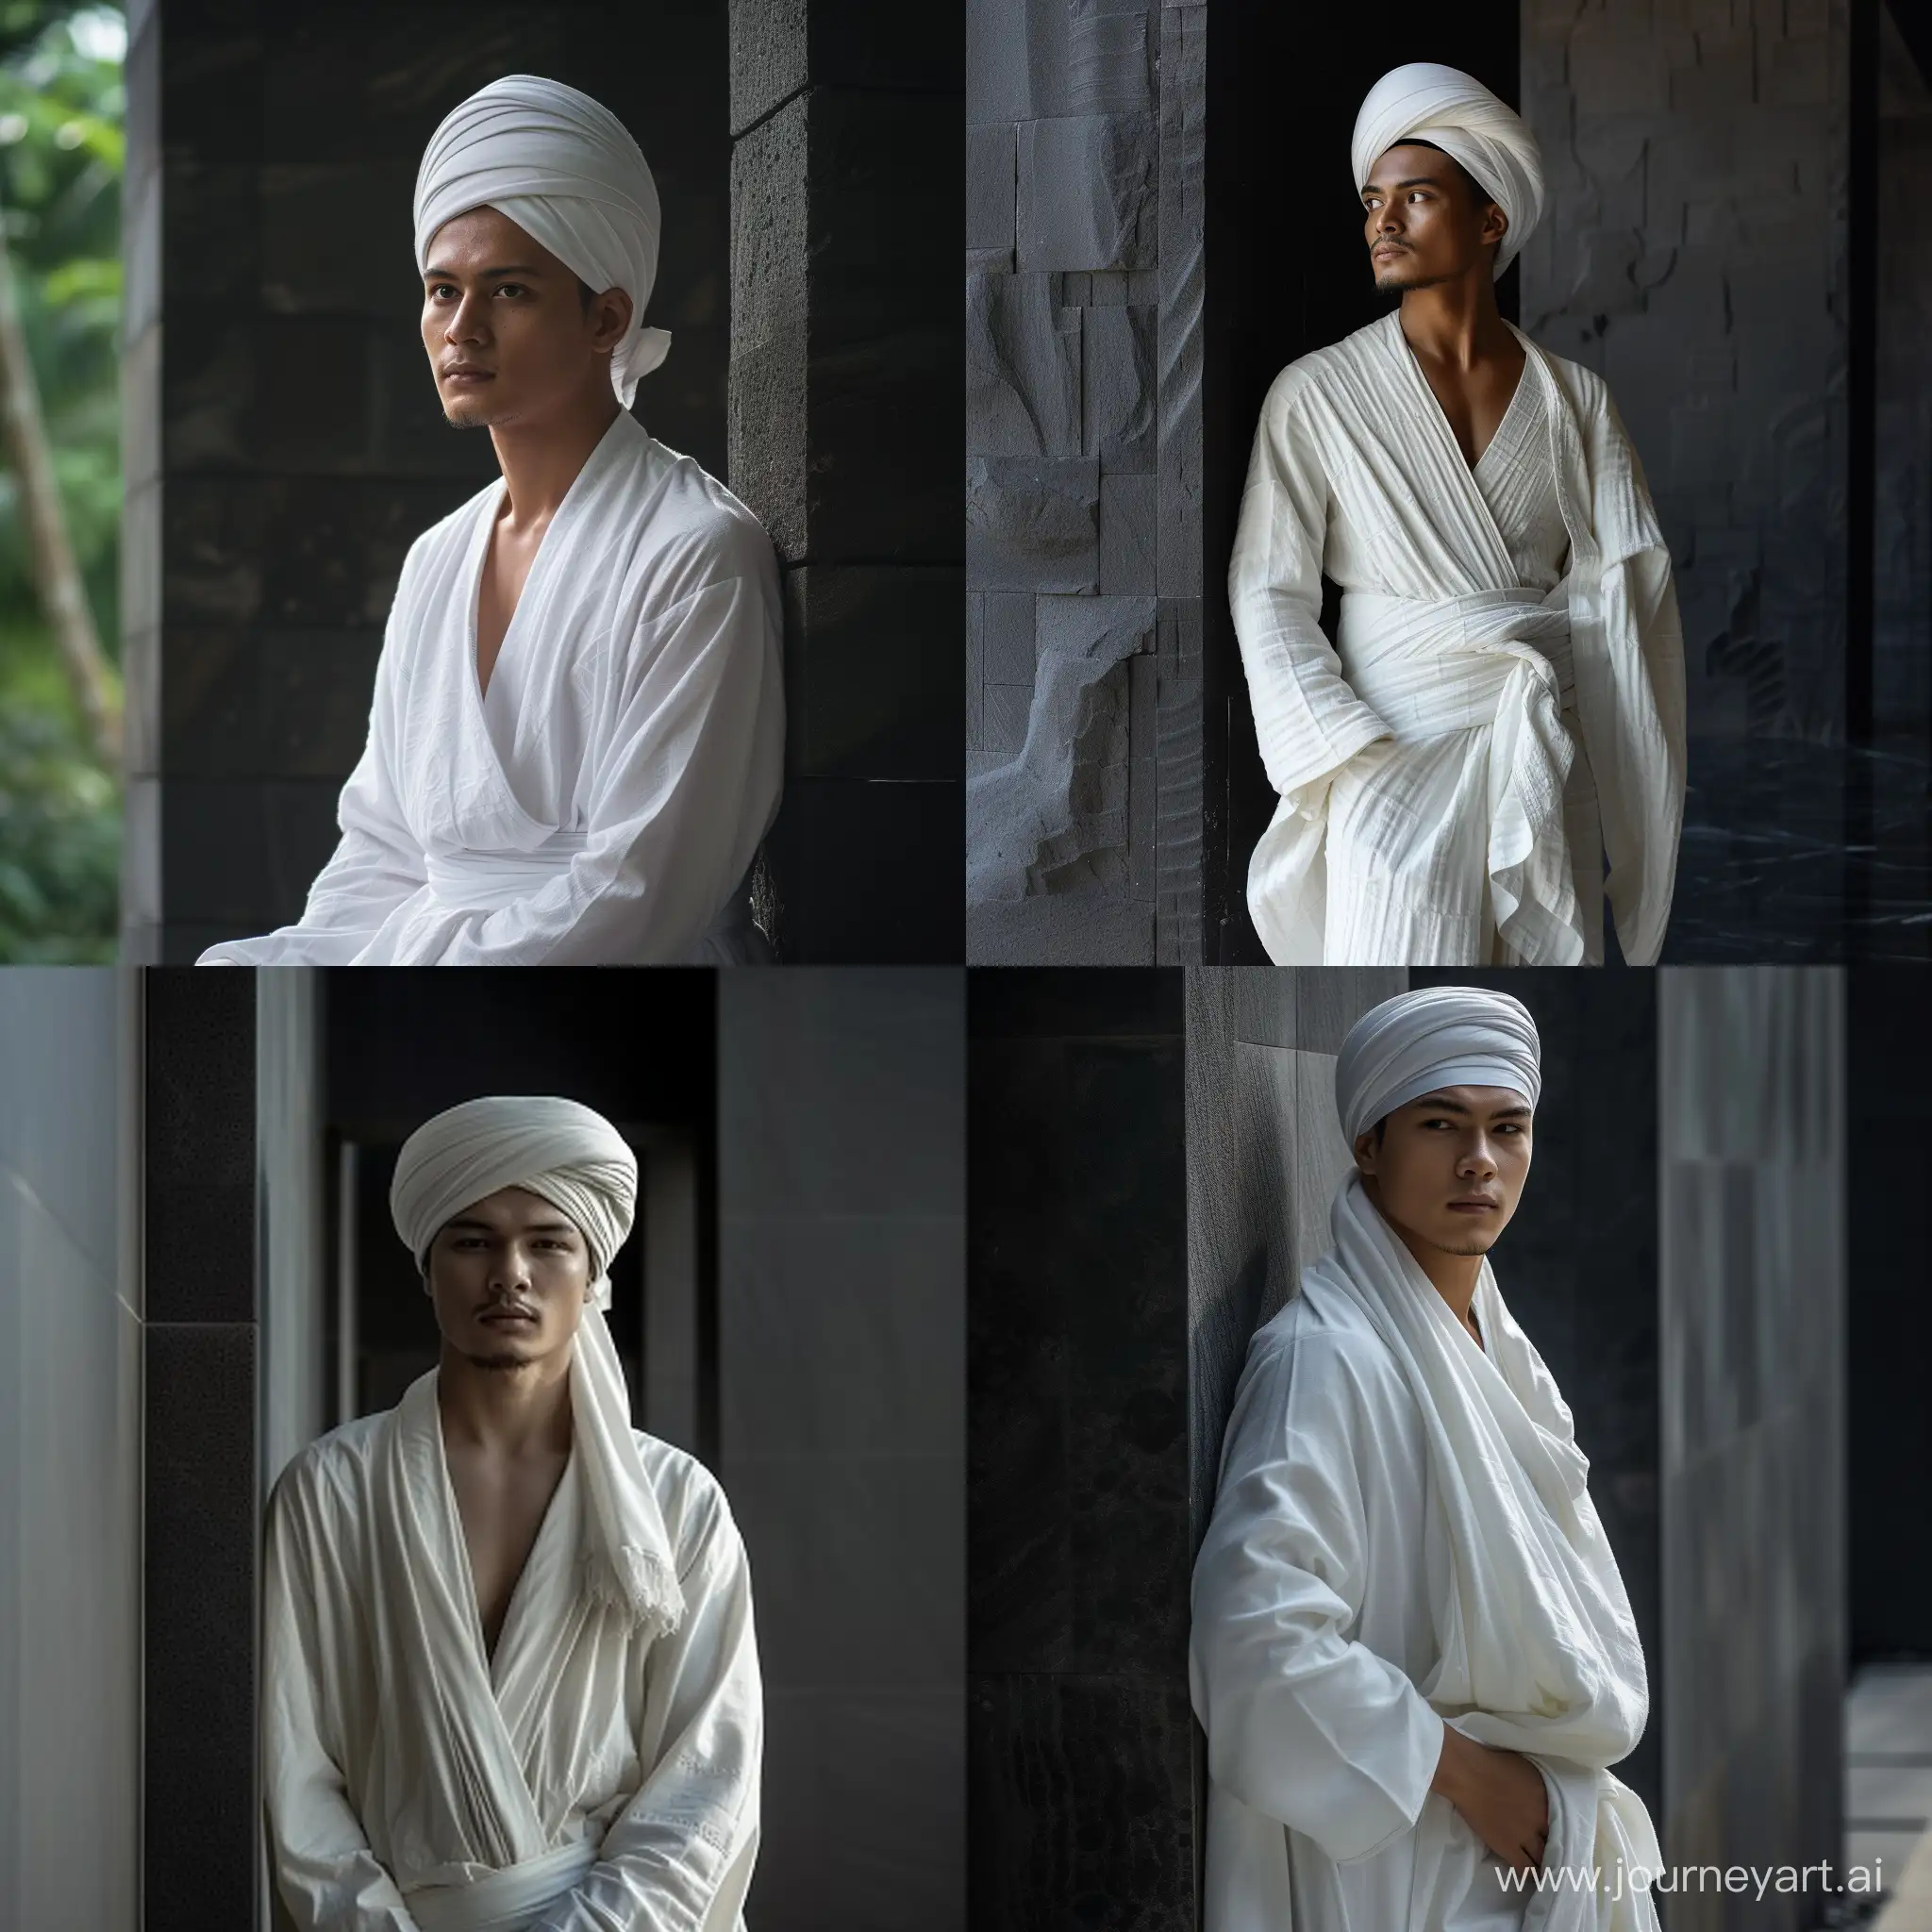 Handsome-Indonesian-Man-in-Traditional-Muslim-Attire-Against-Black-Wall